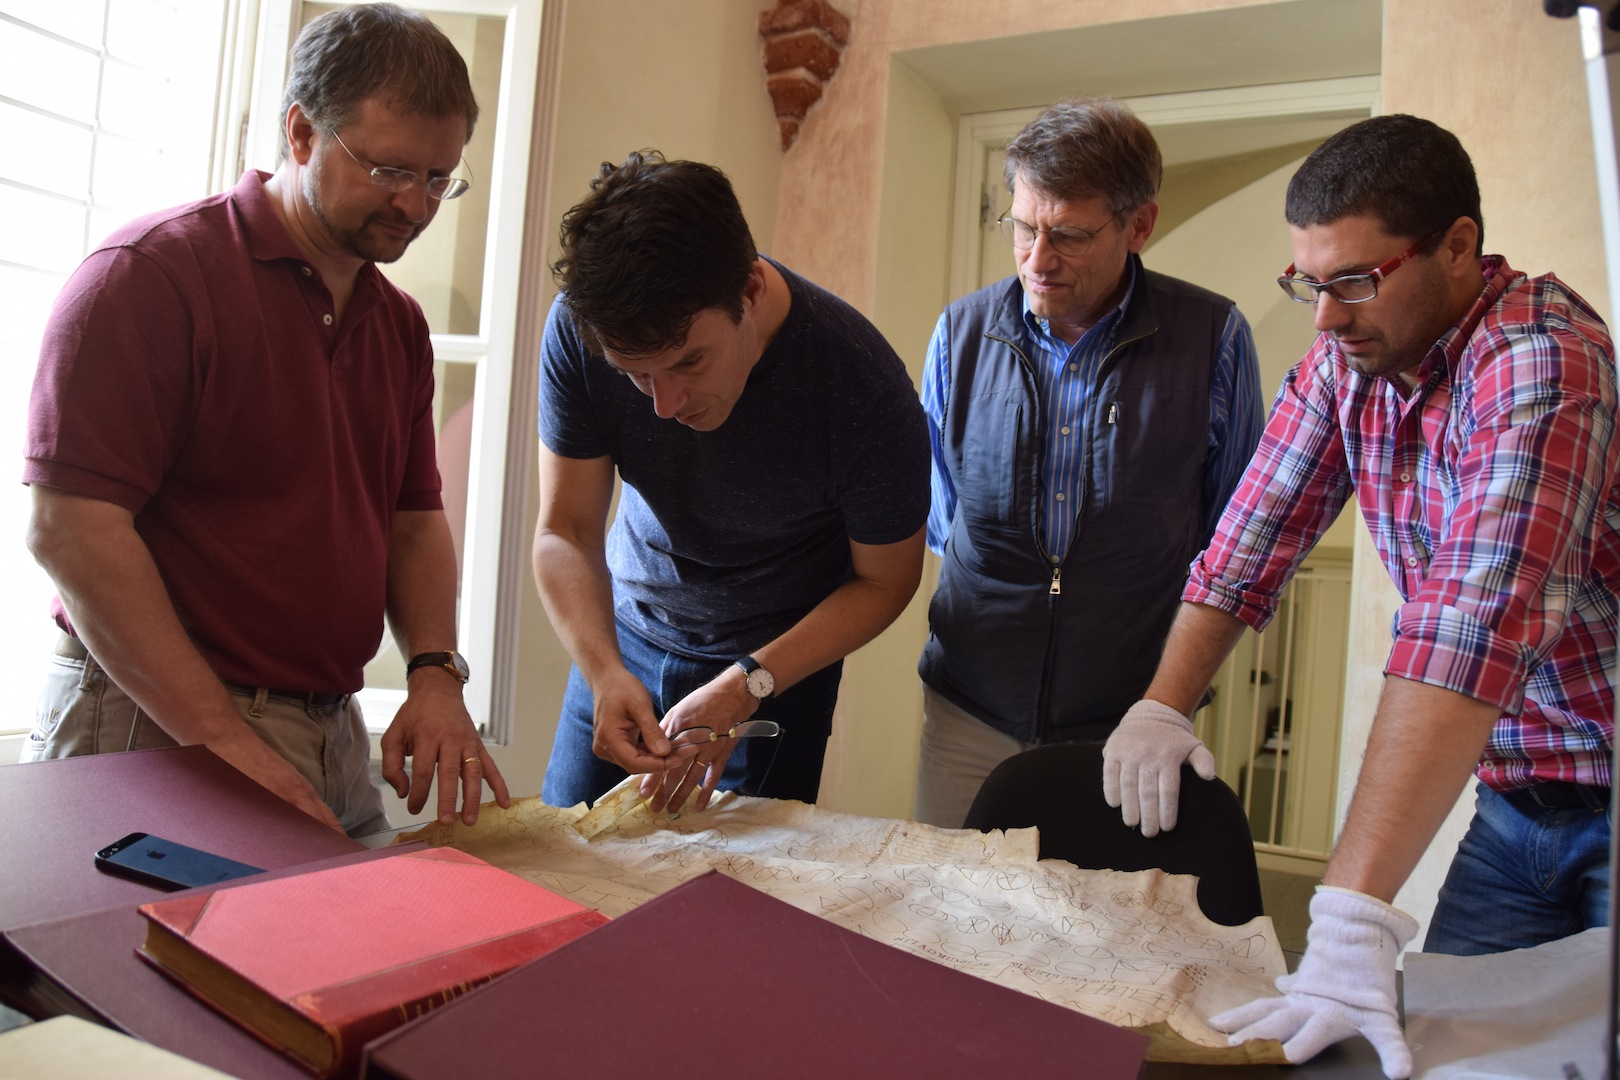 TEAMWORK: Heyworth (second from left) and colleagues Michael Phelps (left) and Roger Easton examine materials at the Archive and Capitulary Library of Vercelli, Italy, as head curator Timoty Leonardi (right) looks on. (University photo / The Lazarus Project)